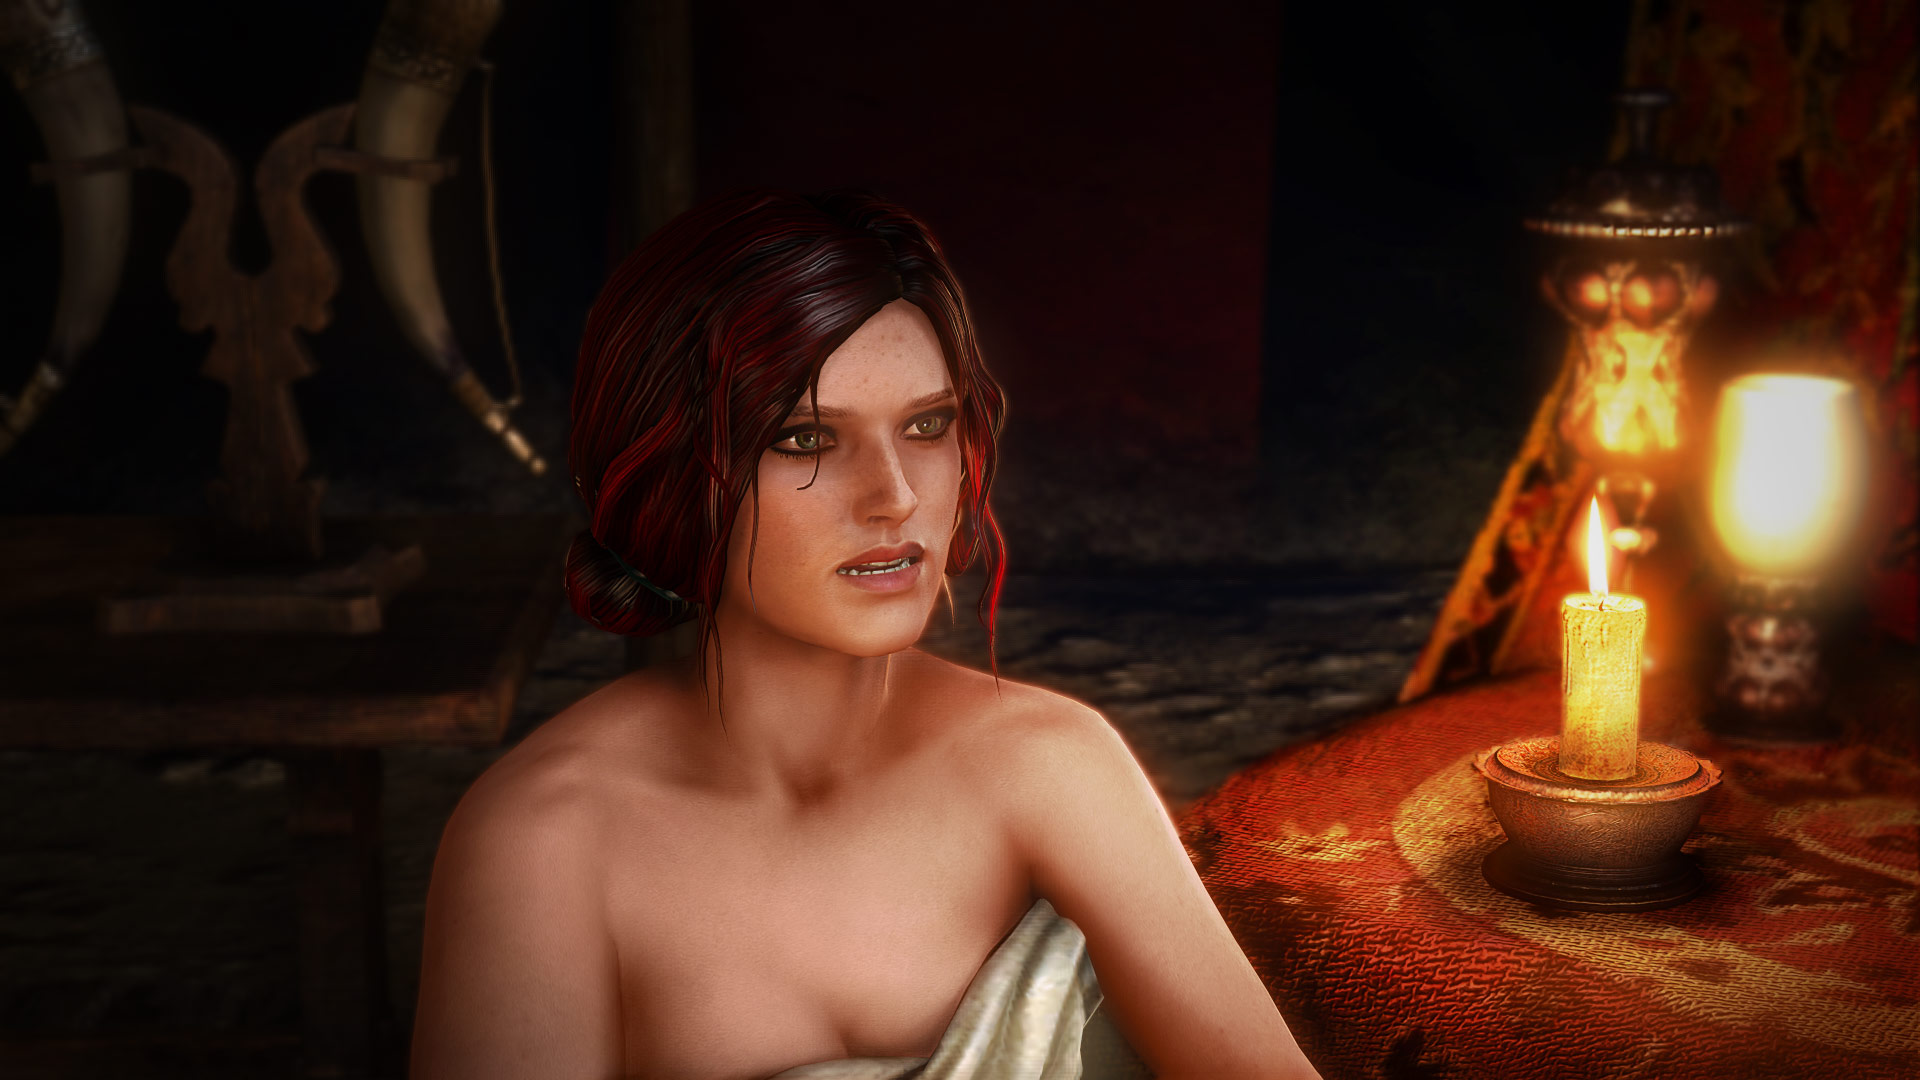 Hunt scenes witcher 3 sex the watch wild all 'The Witcher